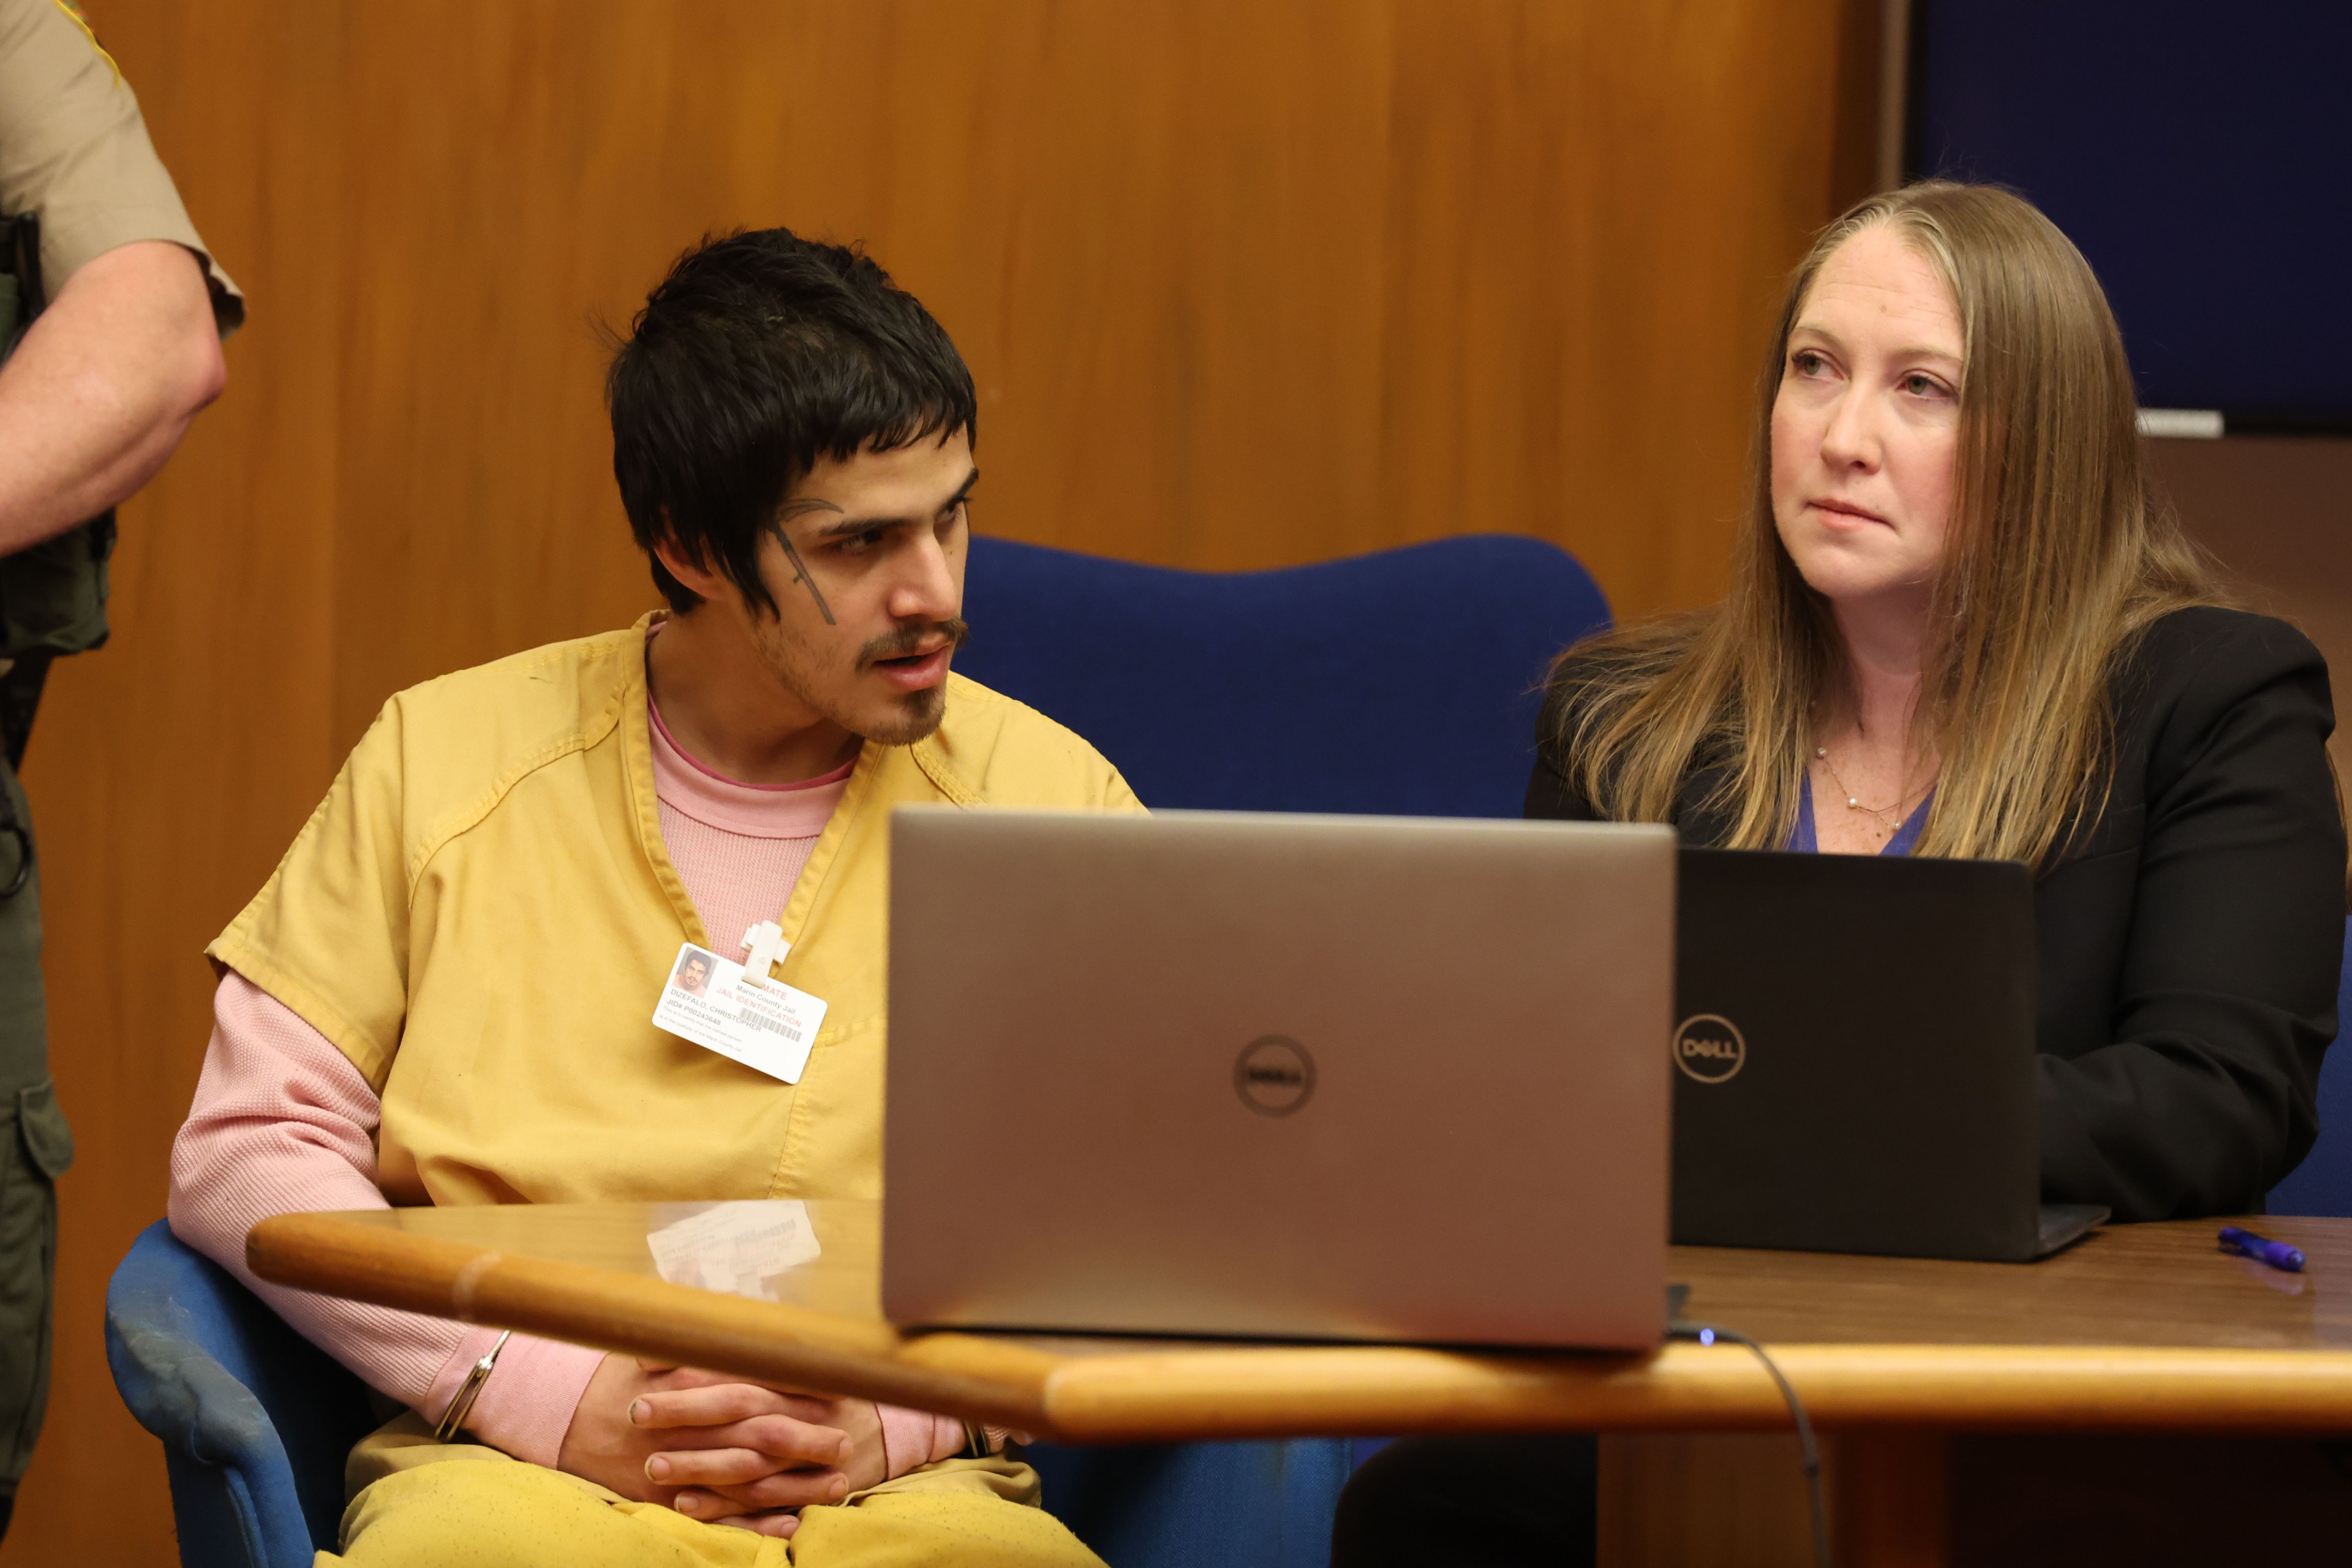 A man in a yellow outfit sits by a woman with a laptop, both at a wooden table, possibly in a courtroom setting.